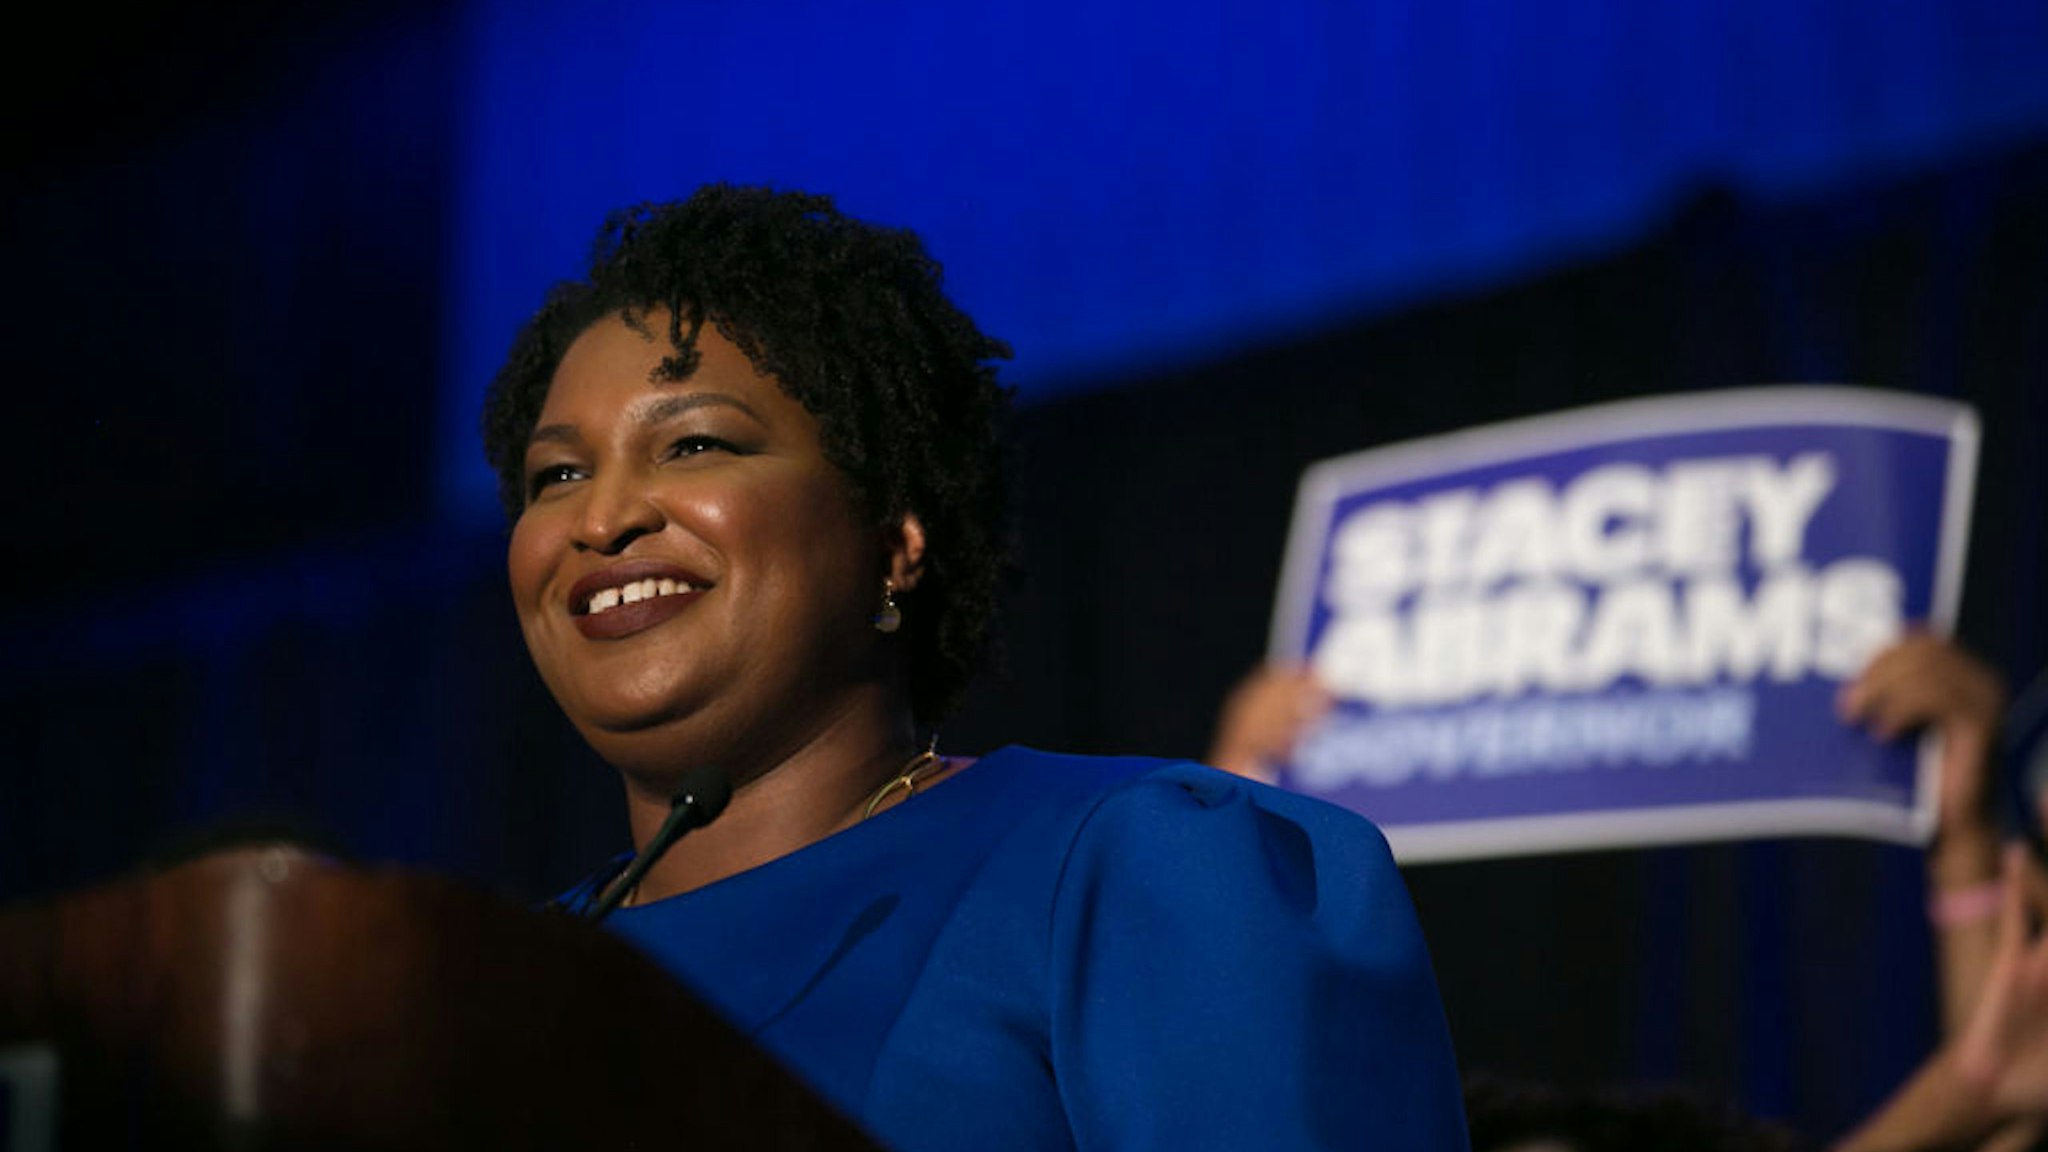 ATLANTA, GA - MAY 22: Georgia Democratic Gubernatorial candidate Stacey Abrams takes the stage to declare victory in the primary during an election night event on May 22, 2018 in Atlanta, Georgia. If elected, Abrams would become the first African American female governor in the state of Georgia.